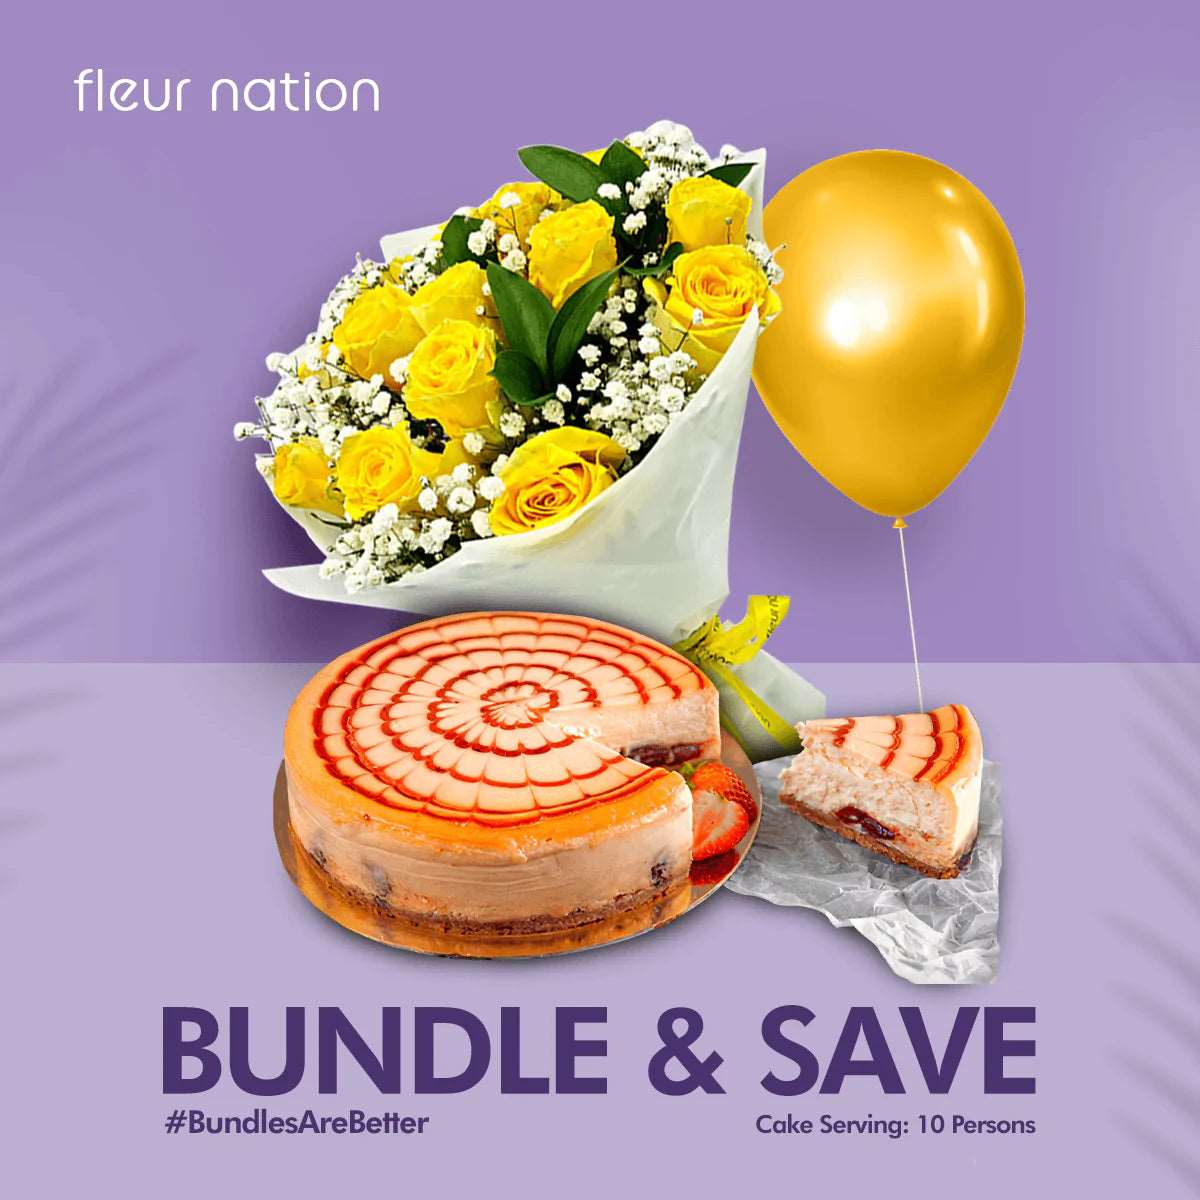 My Surprise - flowers, cake and balloon - Fleur Nation - flowers, chocolates, cakes and gifts same day delivery in Dubai